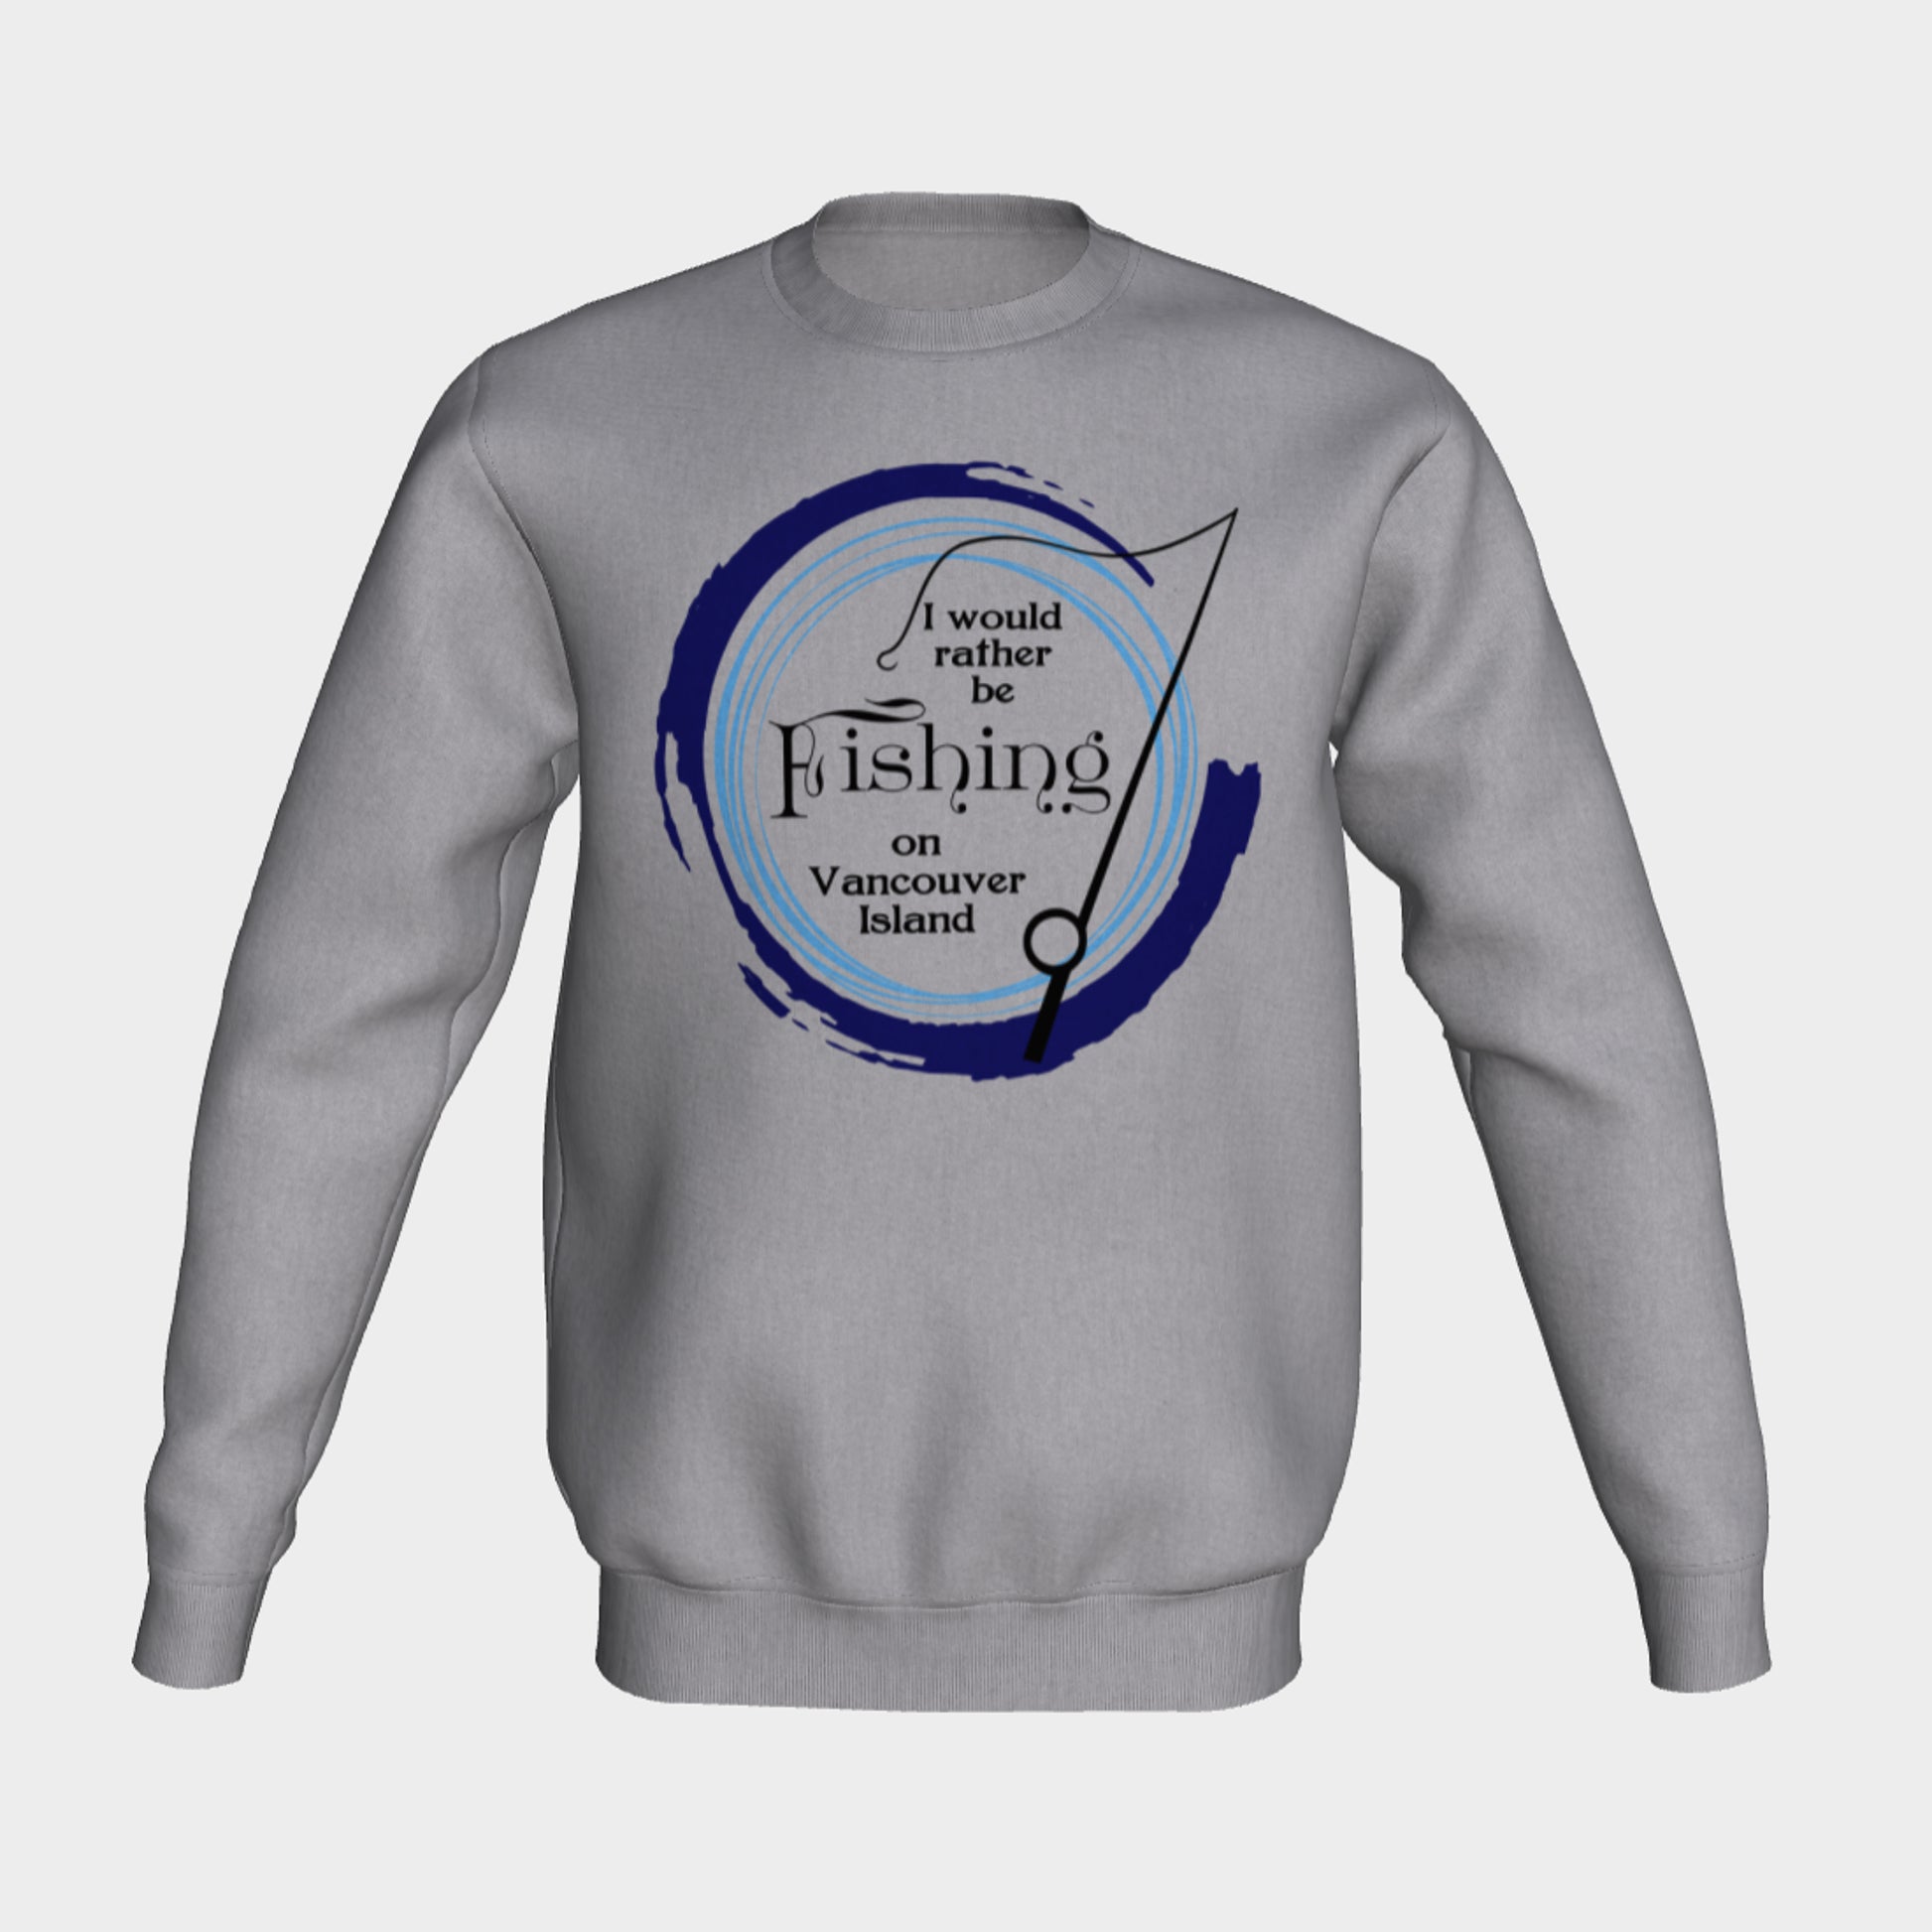 Rather Be Fishing Crewneck Sweatshirt What’s better than a super cozy sweatshirt? A super cozy sweatshirt from Van Isle Goddess!  Super cozy unisex sweatshirt for those chilly days.  Excellent for men or women.   Fit is roomy and comfortable. 